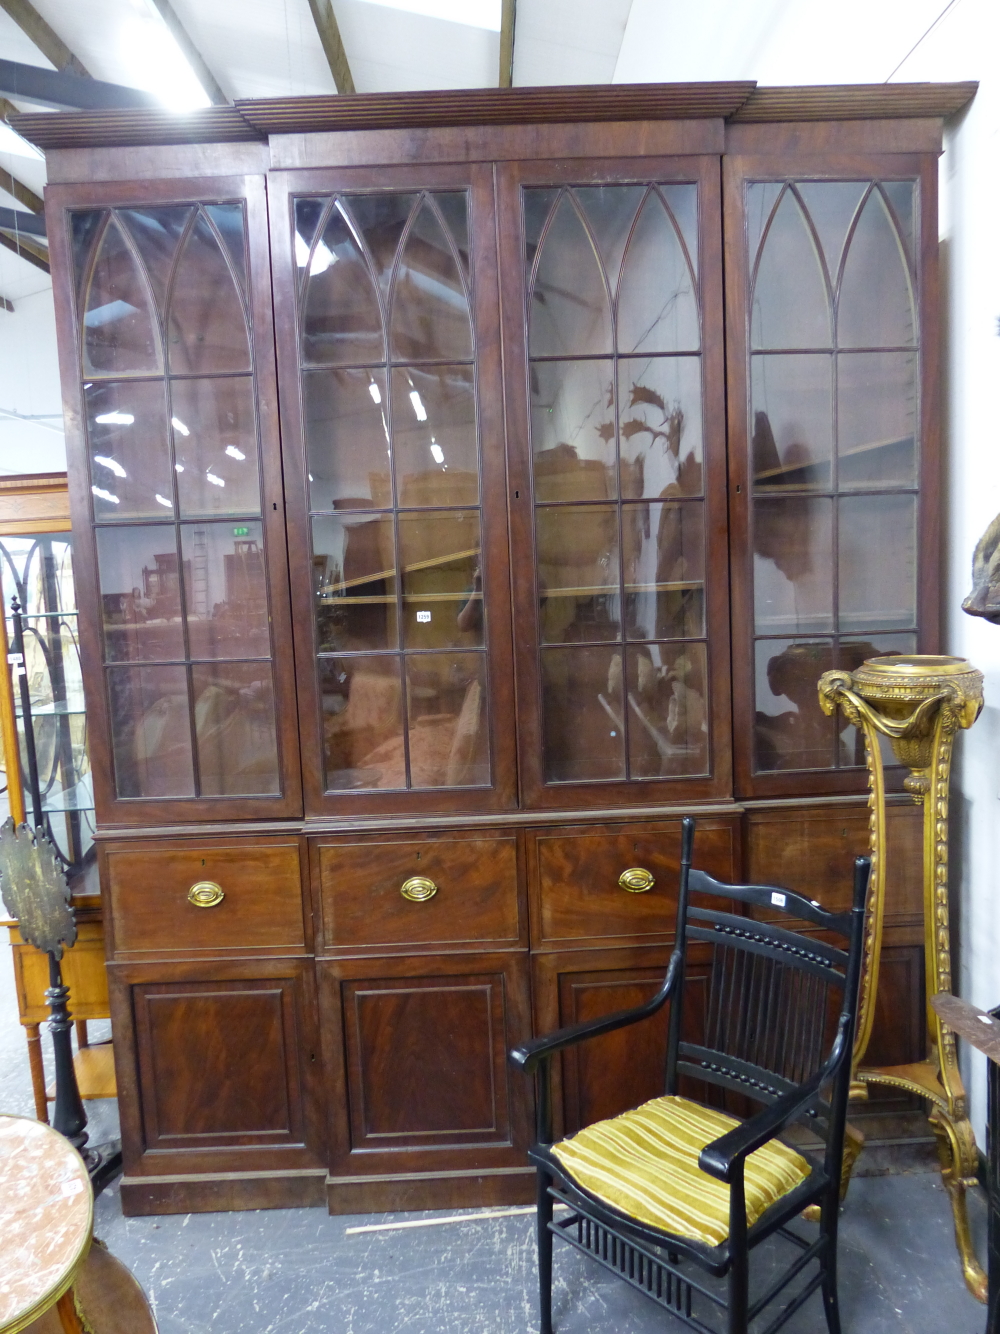 A GEO.III. MAHOGANY SHALLOW BOOKCASE OR APOTHECARY DISPLAY CABINET WITH FOUR GLAZED DOORS OVER PANEL